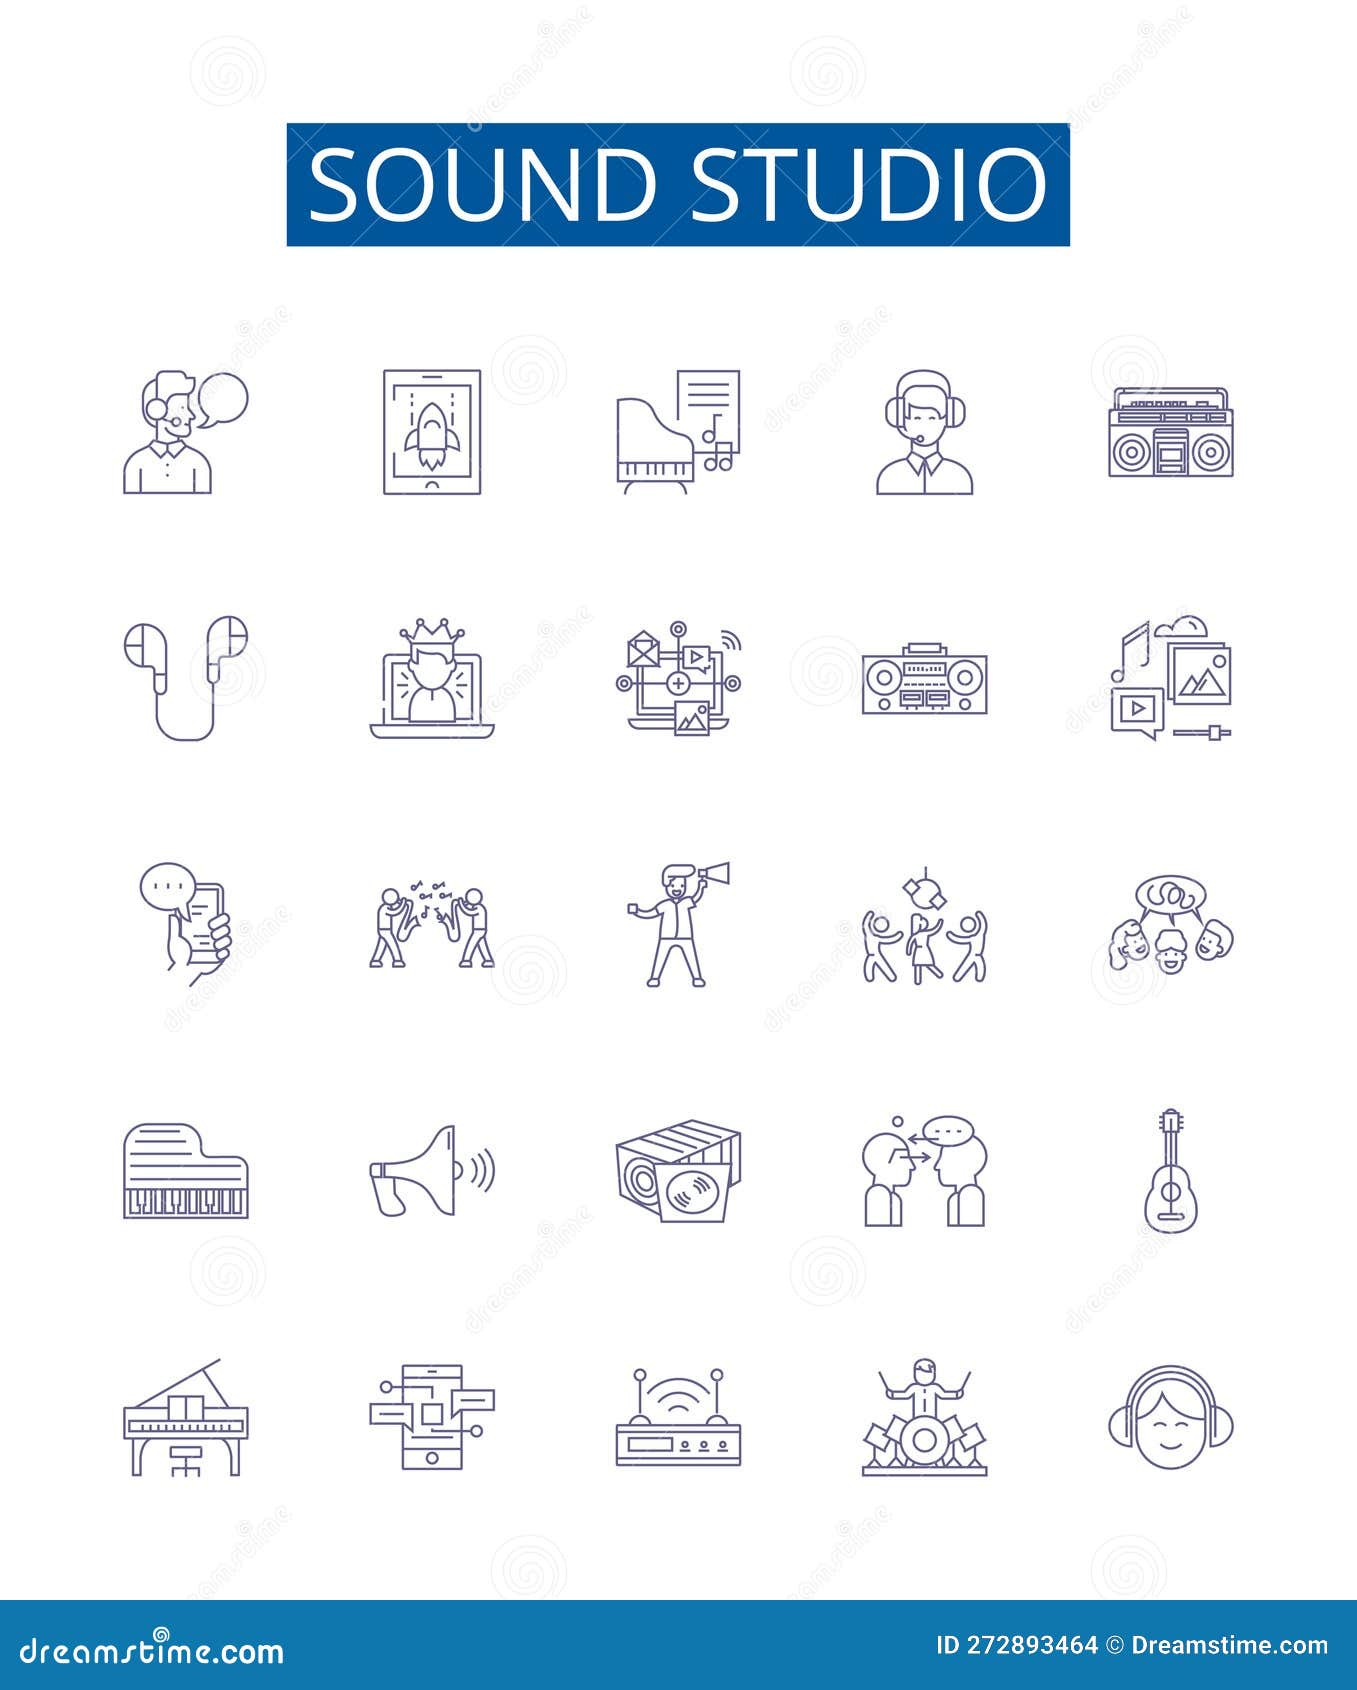 sound studio line icons signs set.  collection of recording, mixing, music, soundstage, microphone, producer